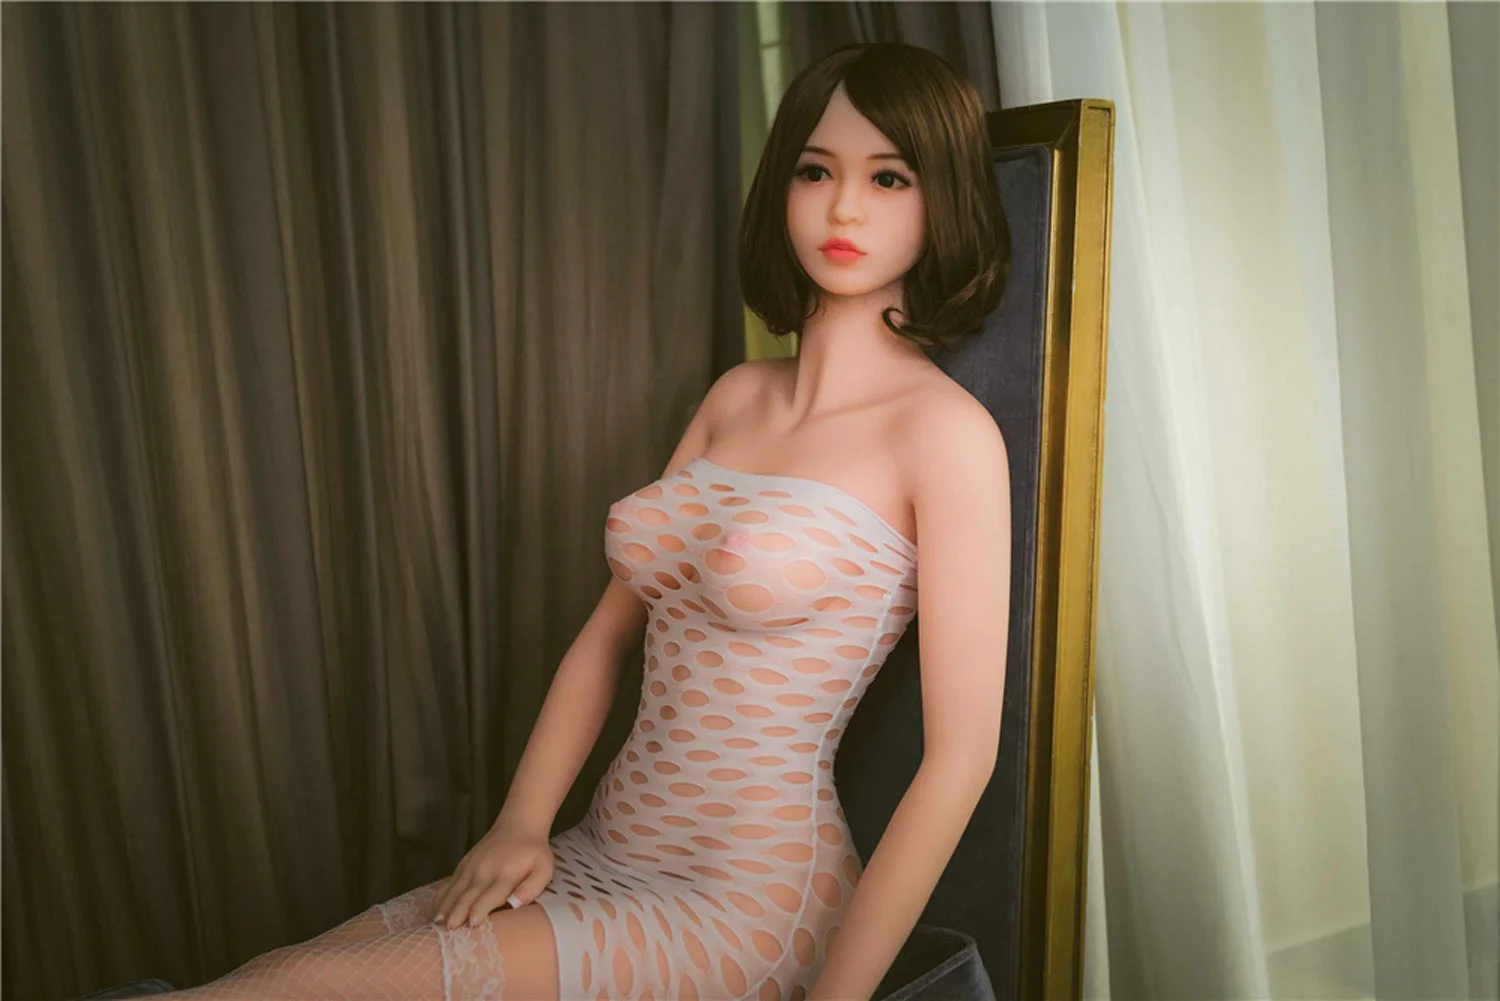 Sex doll with hands on skirt